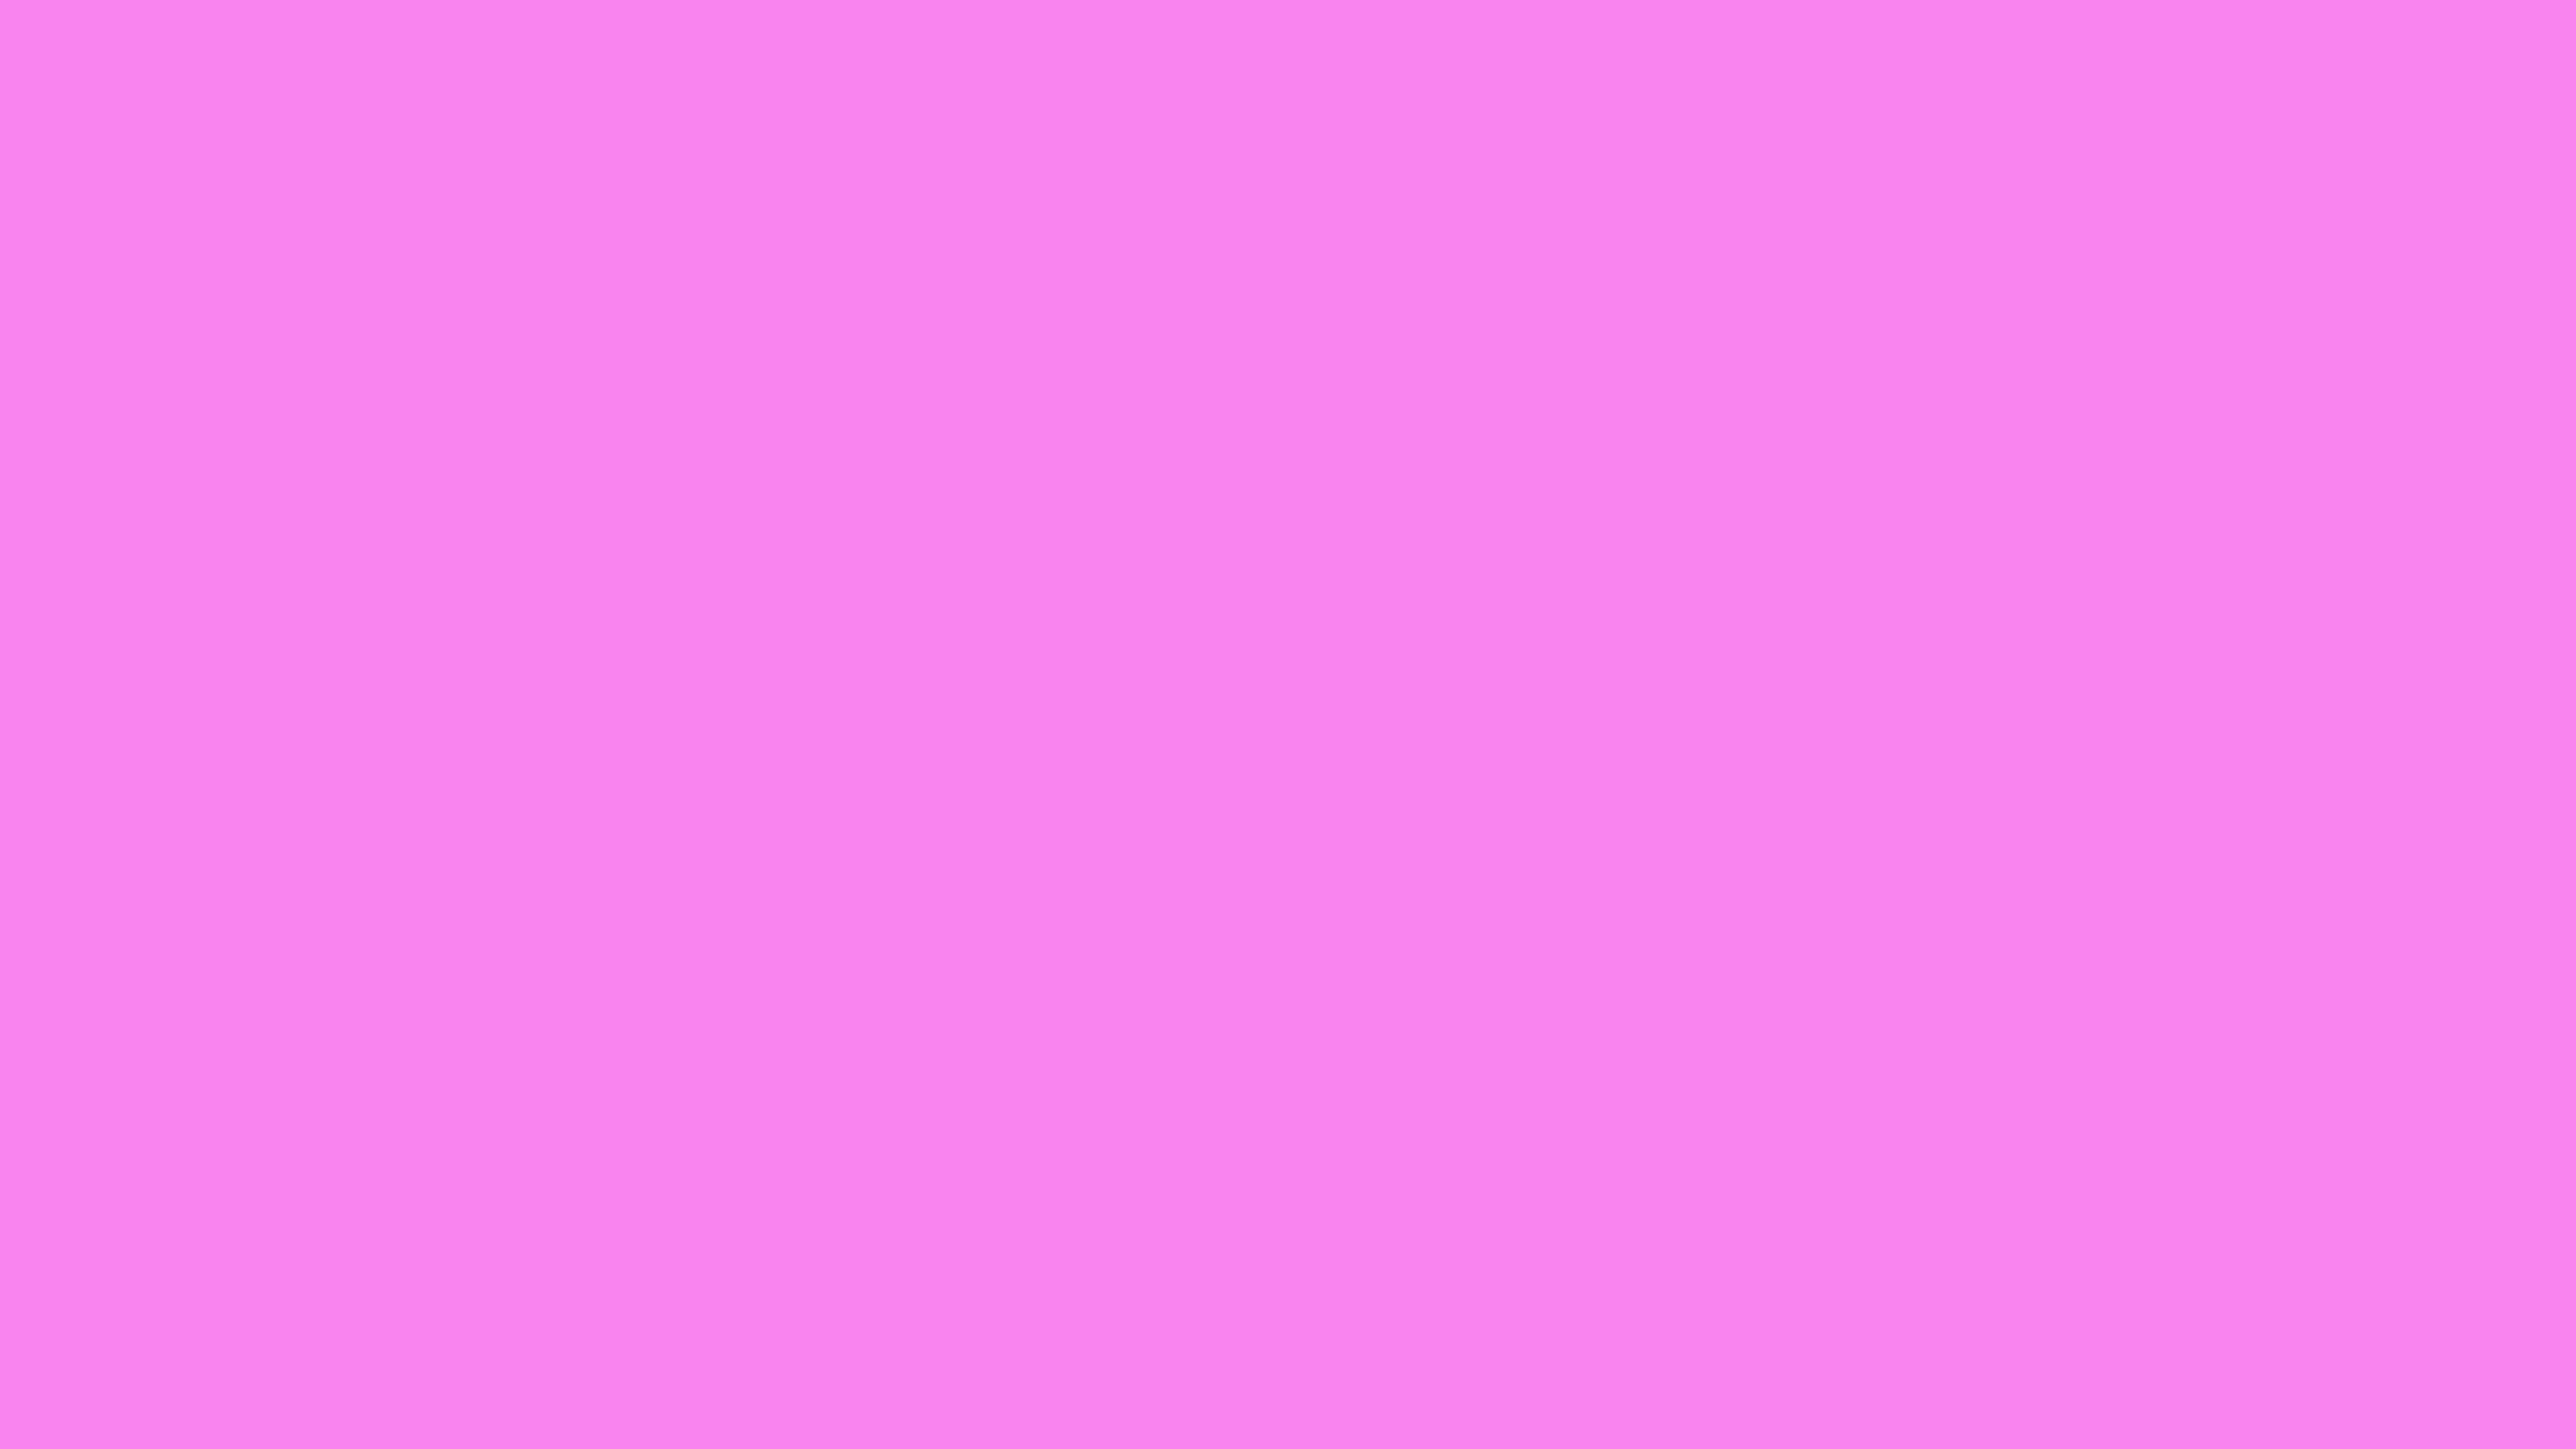 Light Fuchsia Pink Solid Color Background Image | Free Image Generator